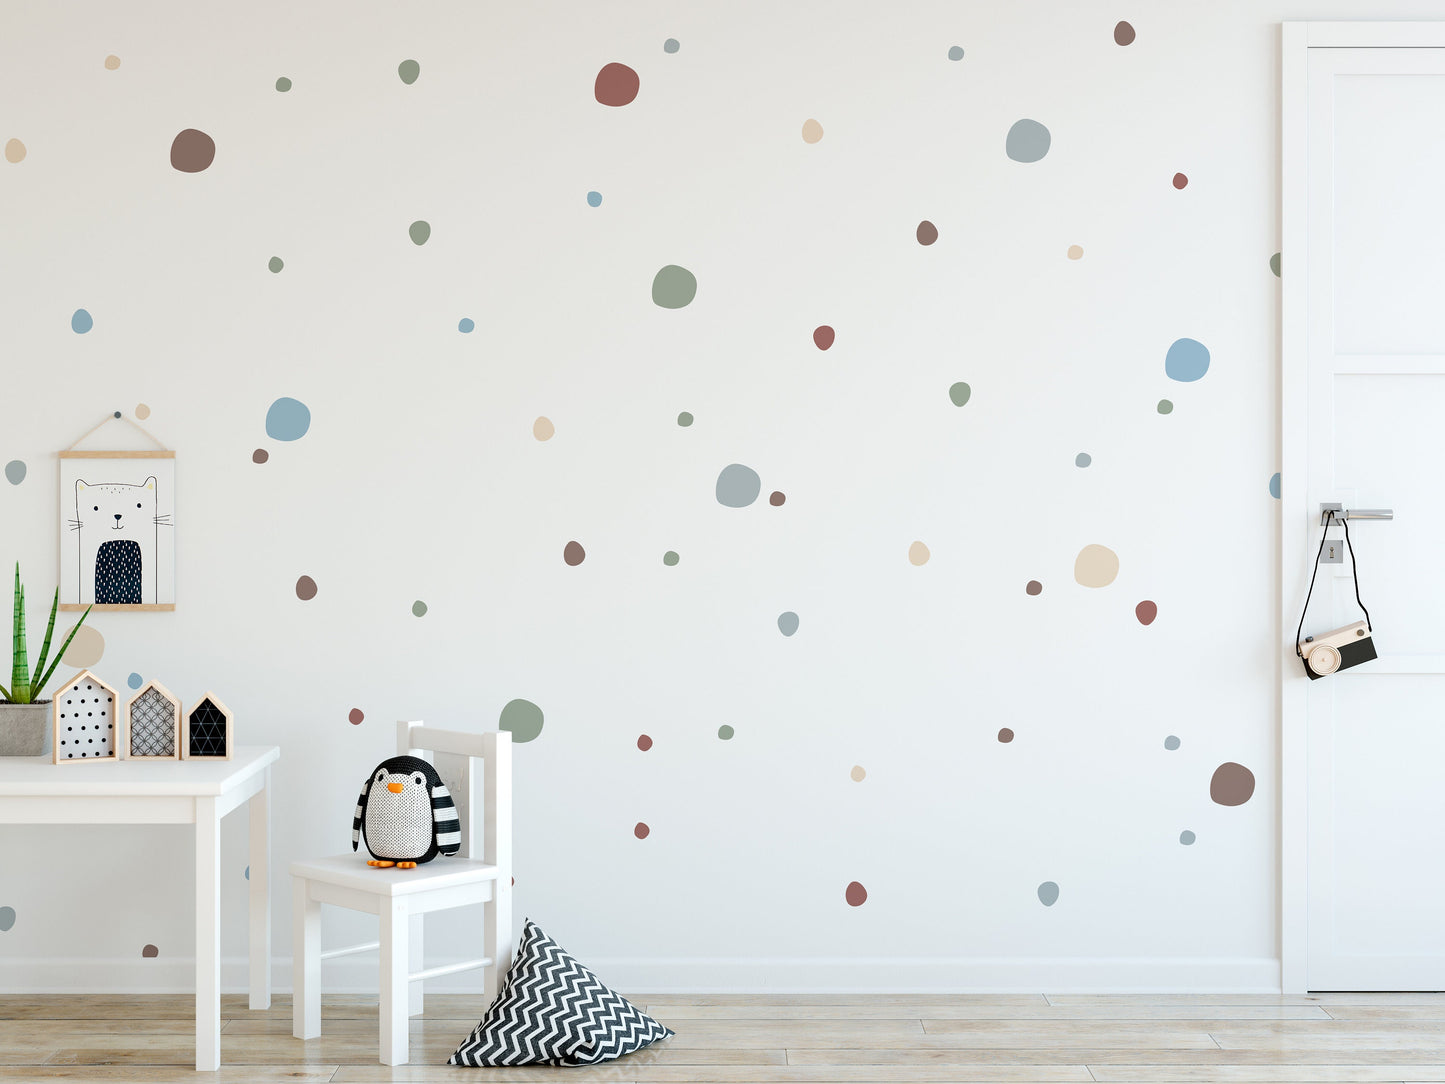 Earth Neutral Polka Dot Wall Stickers Wall Decals For Kids Rooms Children's Nursery Decor Removable 150 Pack